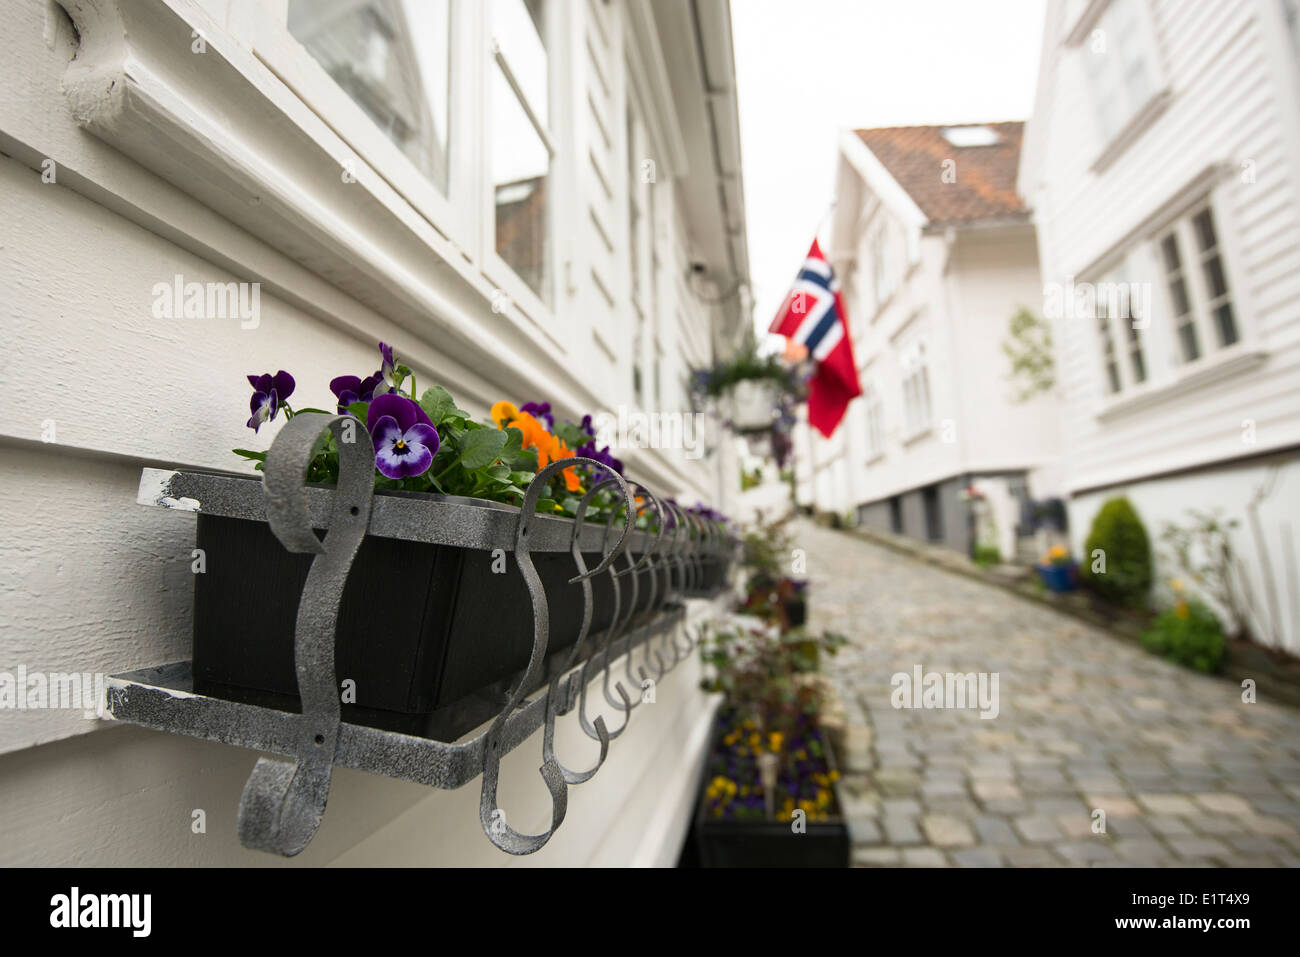 White wooden streets and houses of Old Stavanger or Gamle Stavanger in Norway Stock Photo